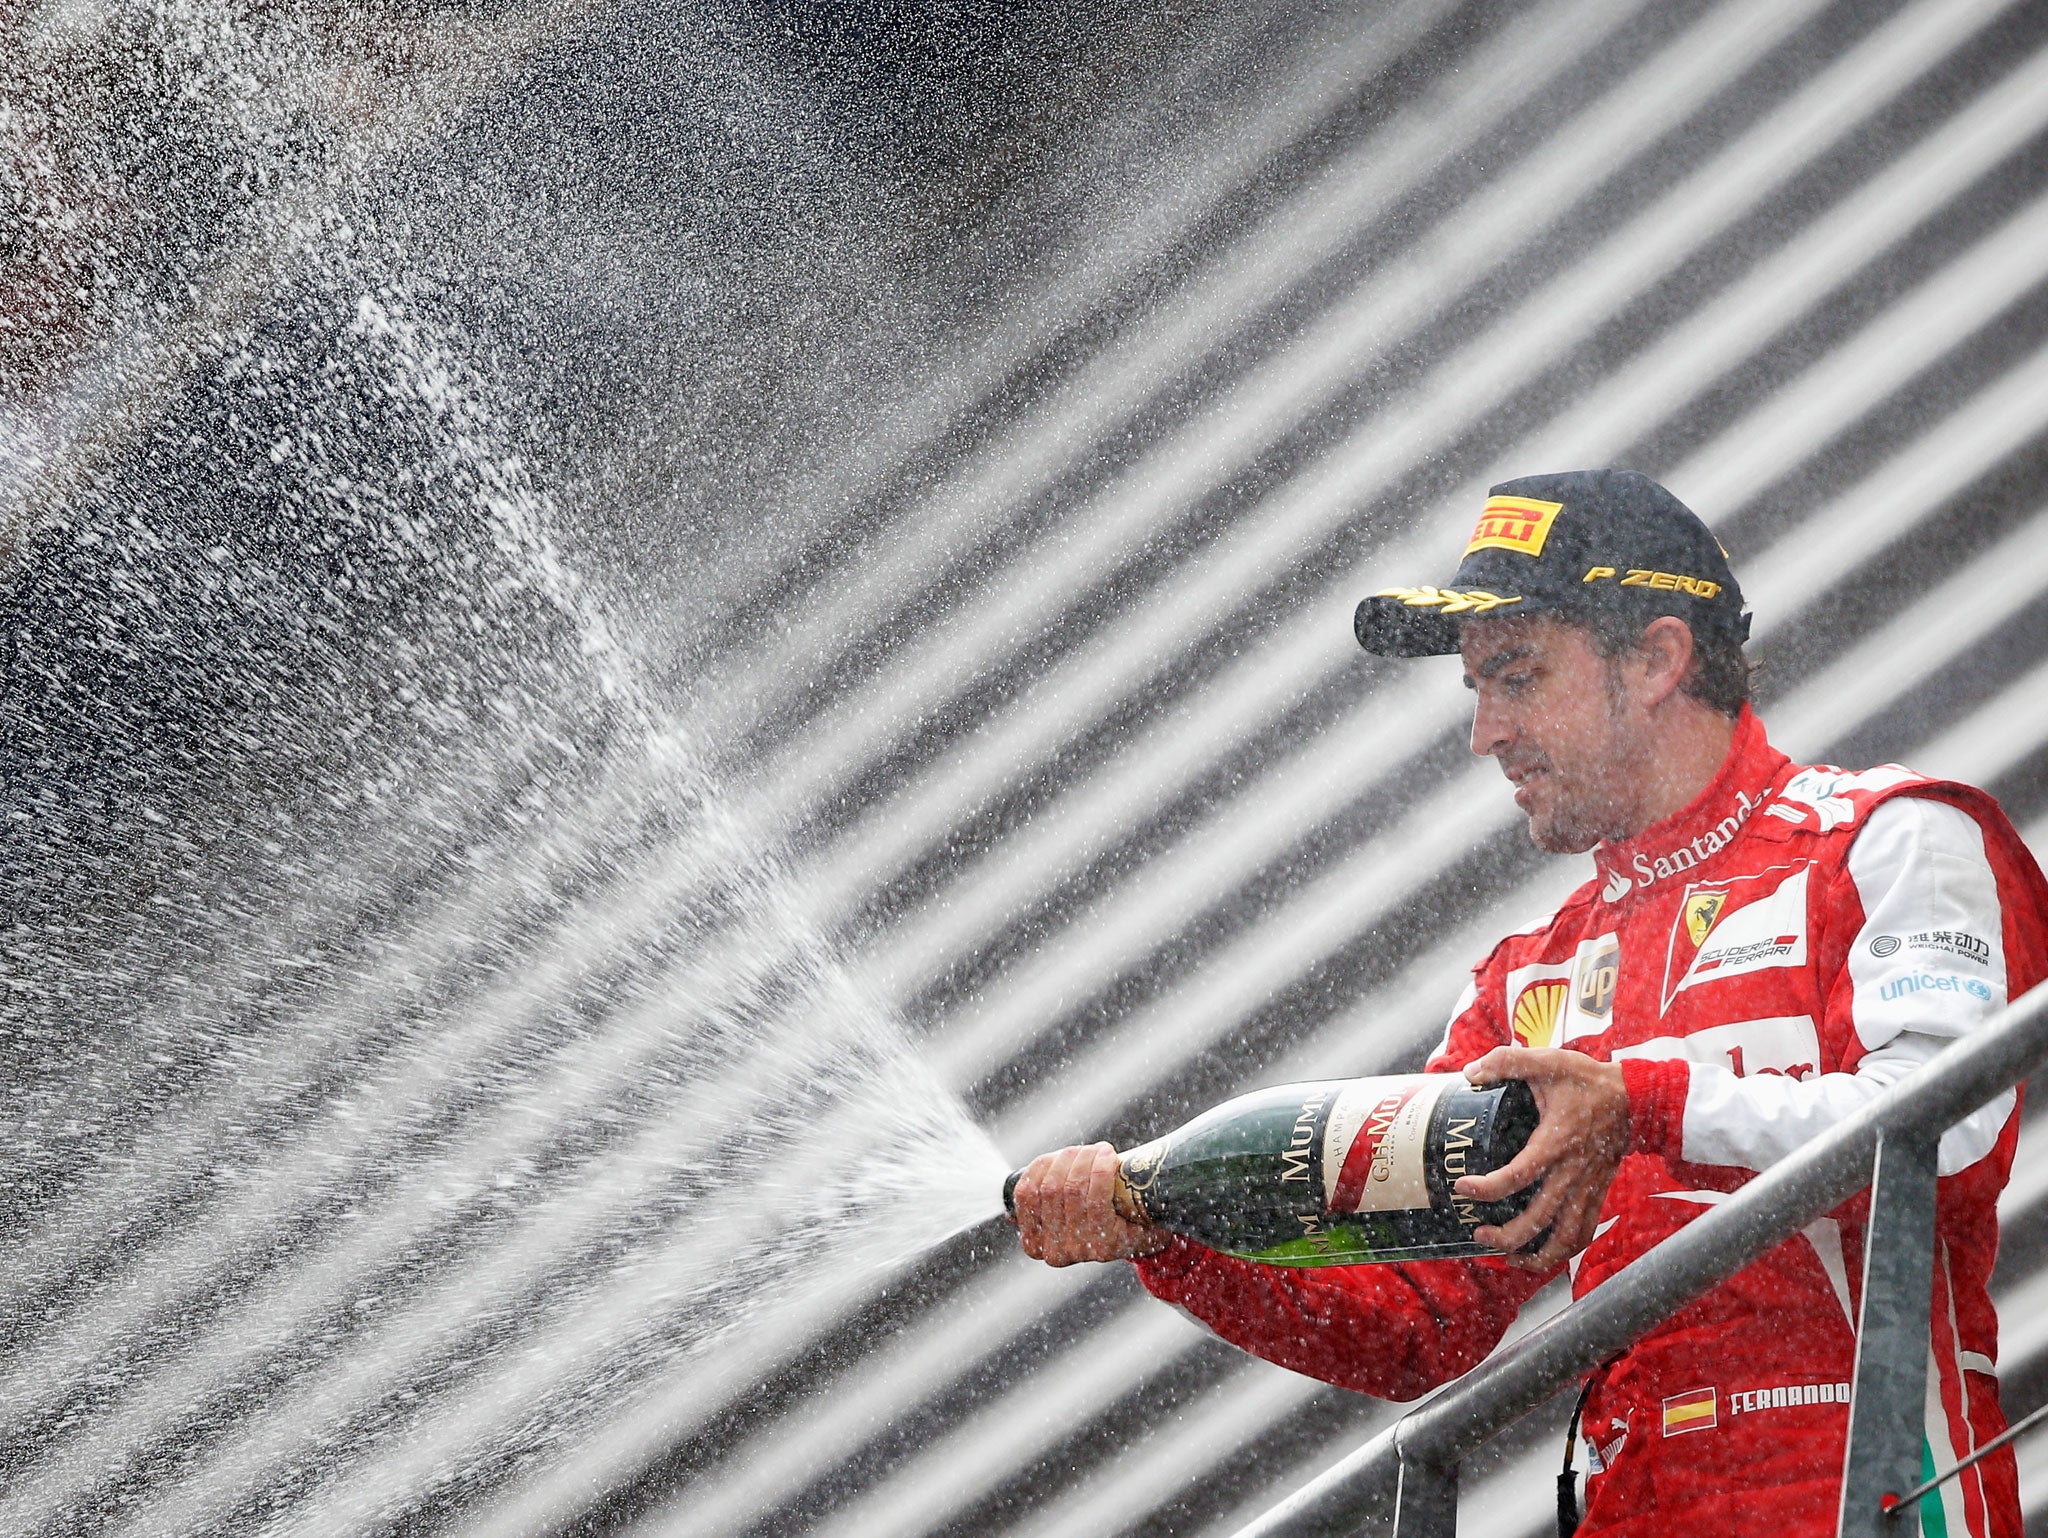 SPA, BELGIUM - AUGUST 25: Fernando Alonso of Spain and Ferrari celebrates finishing second during the Belgian Grand Prix at Circuit de Spa-Francorchamps on August 25, 2013 in Spa, Belgium. GETTY IMAGES